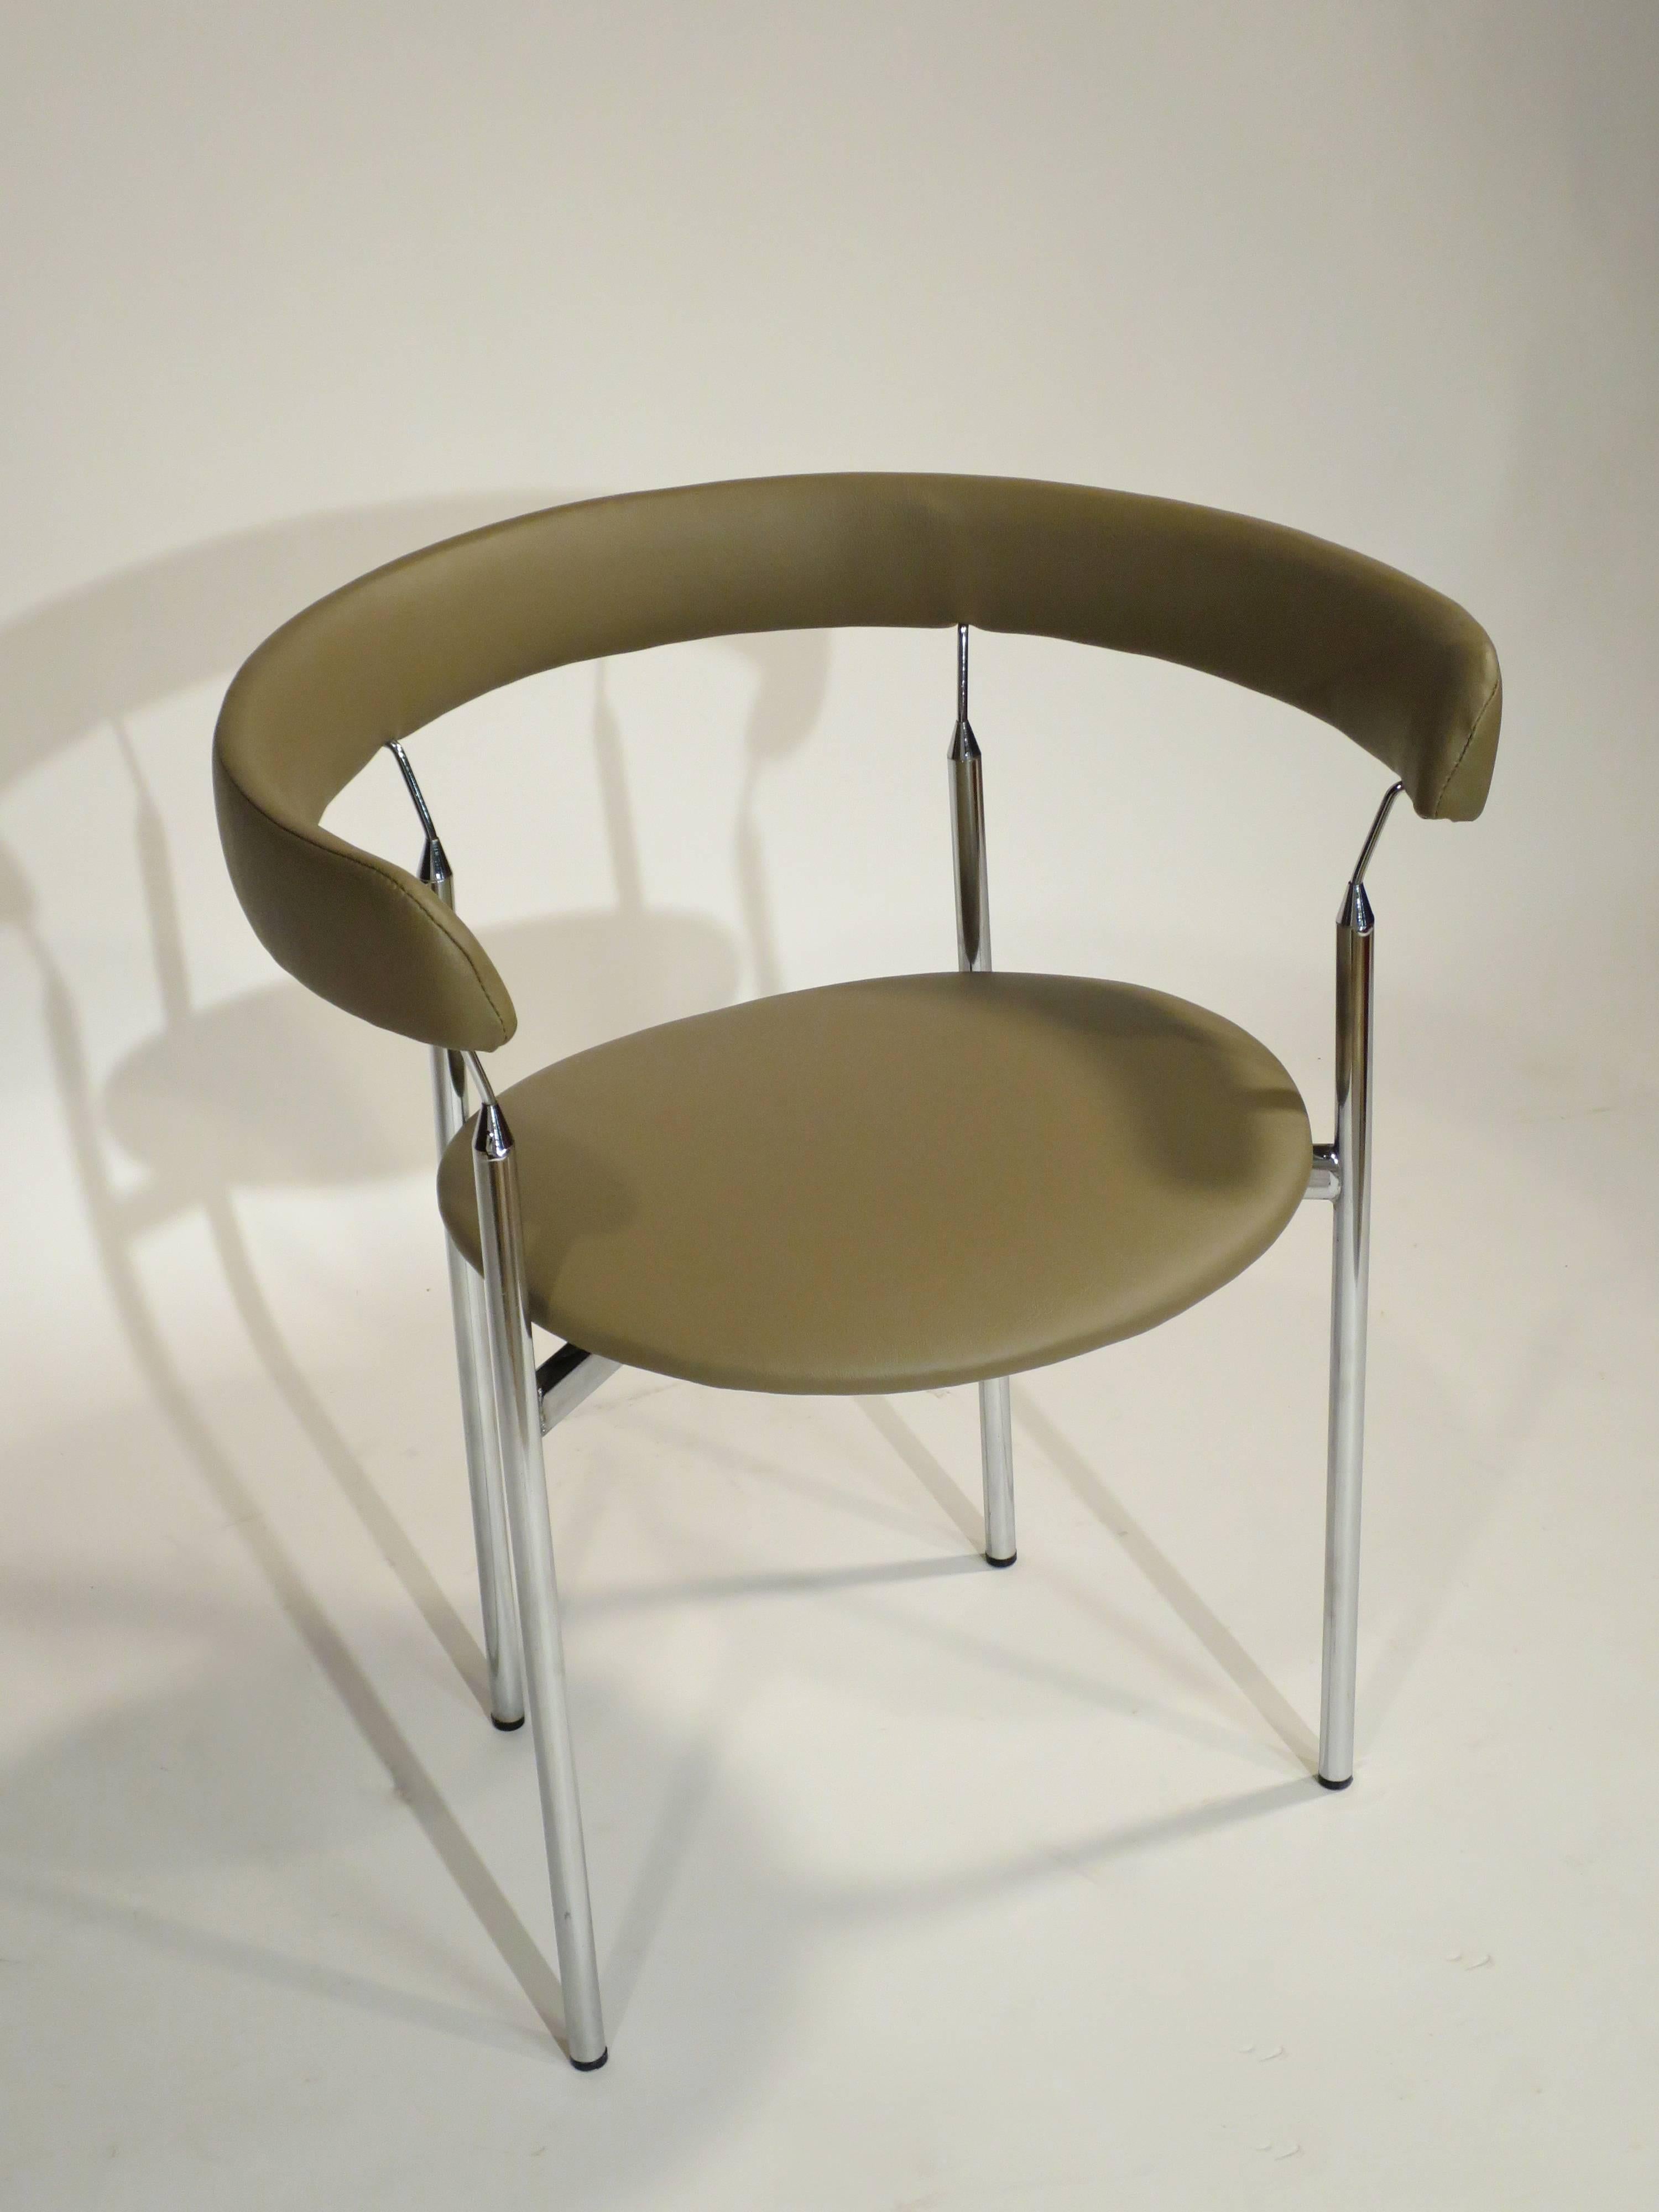 'Rondo' armchair designed by Jan Lunde Knutsen. Manufactured by Karl Sørlie & Sønner. Made in Norway, circa 1960s.